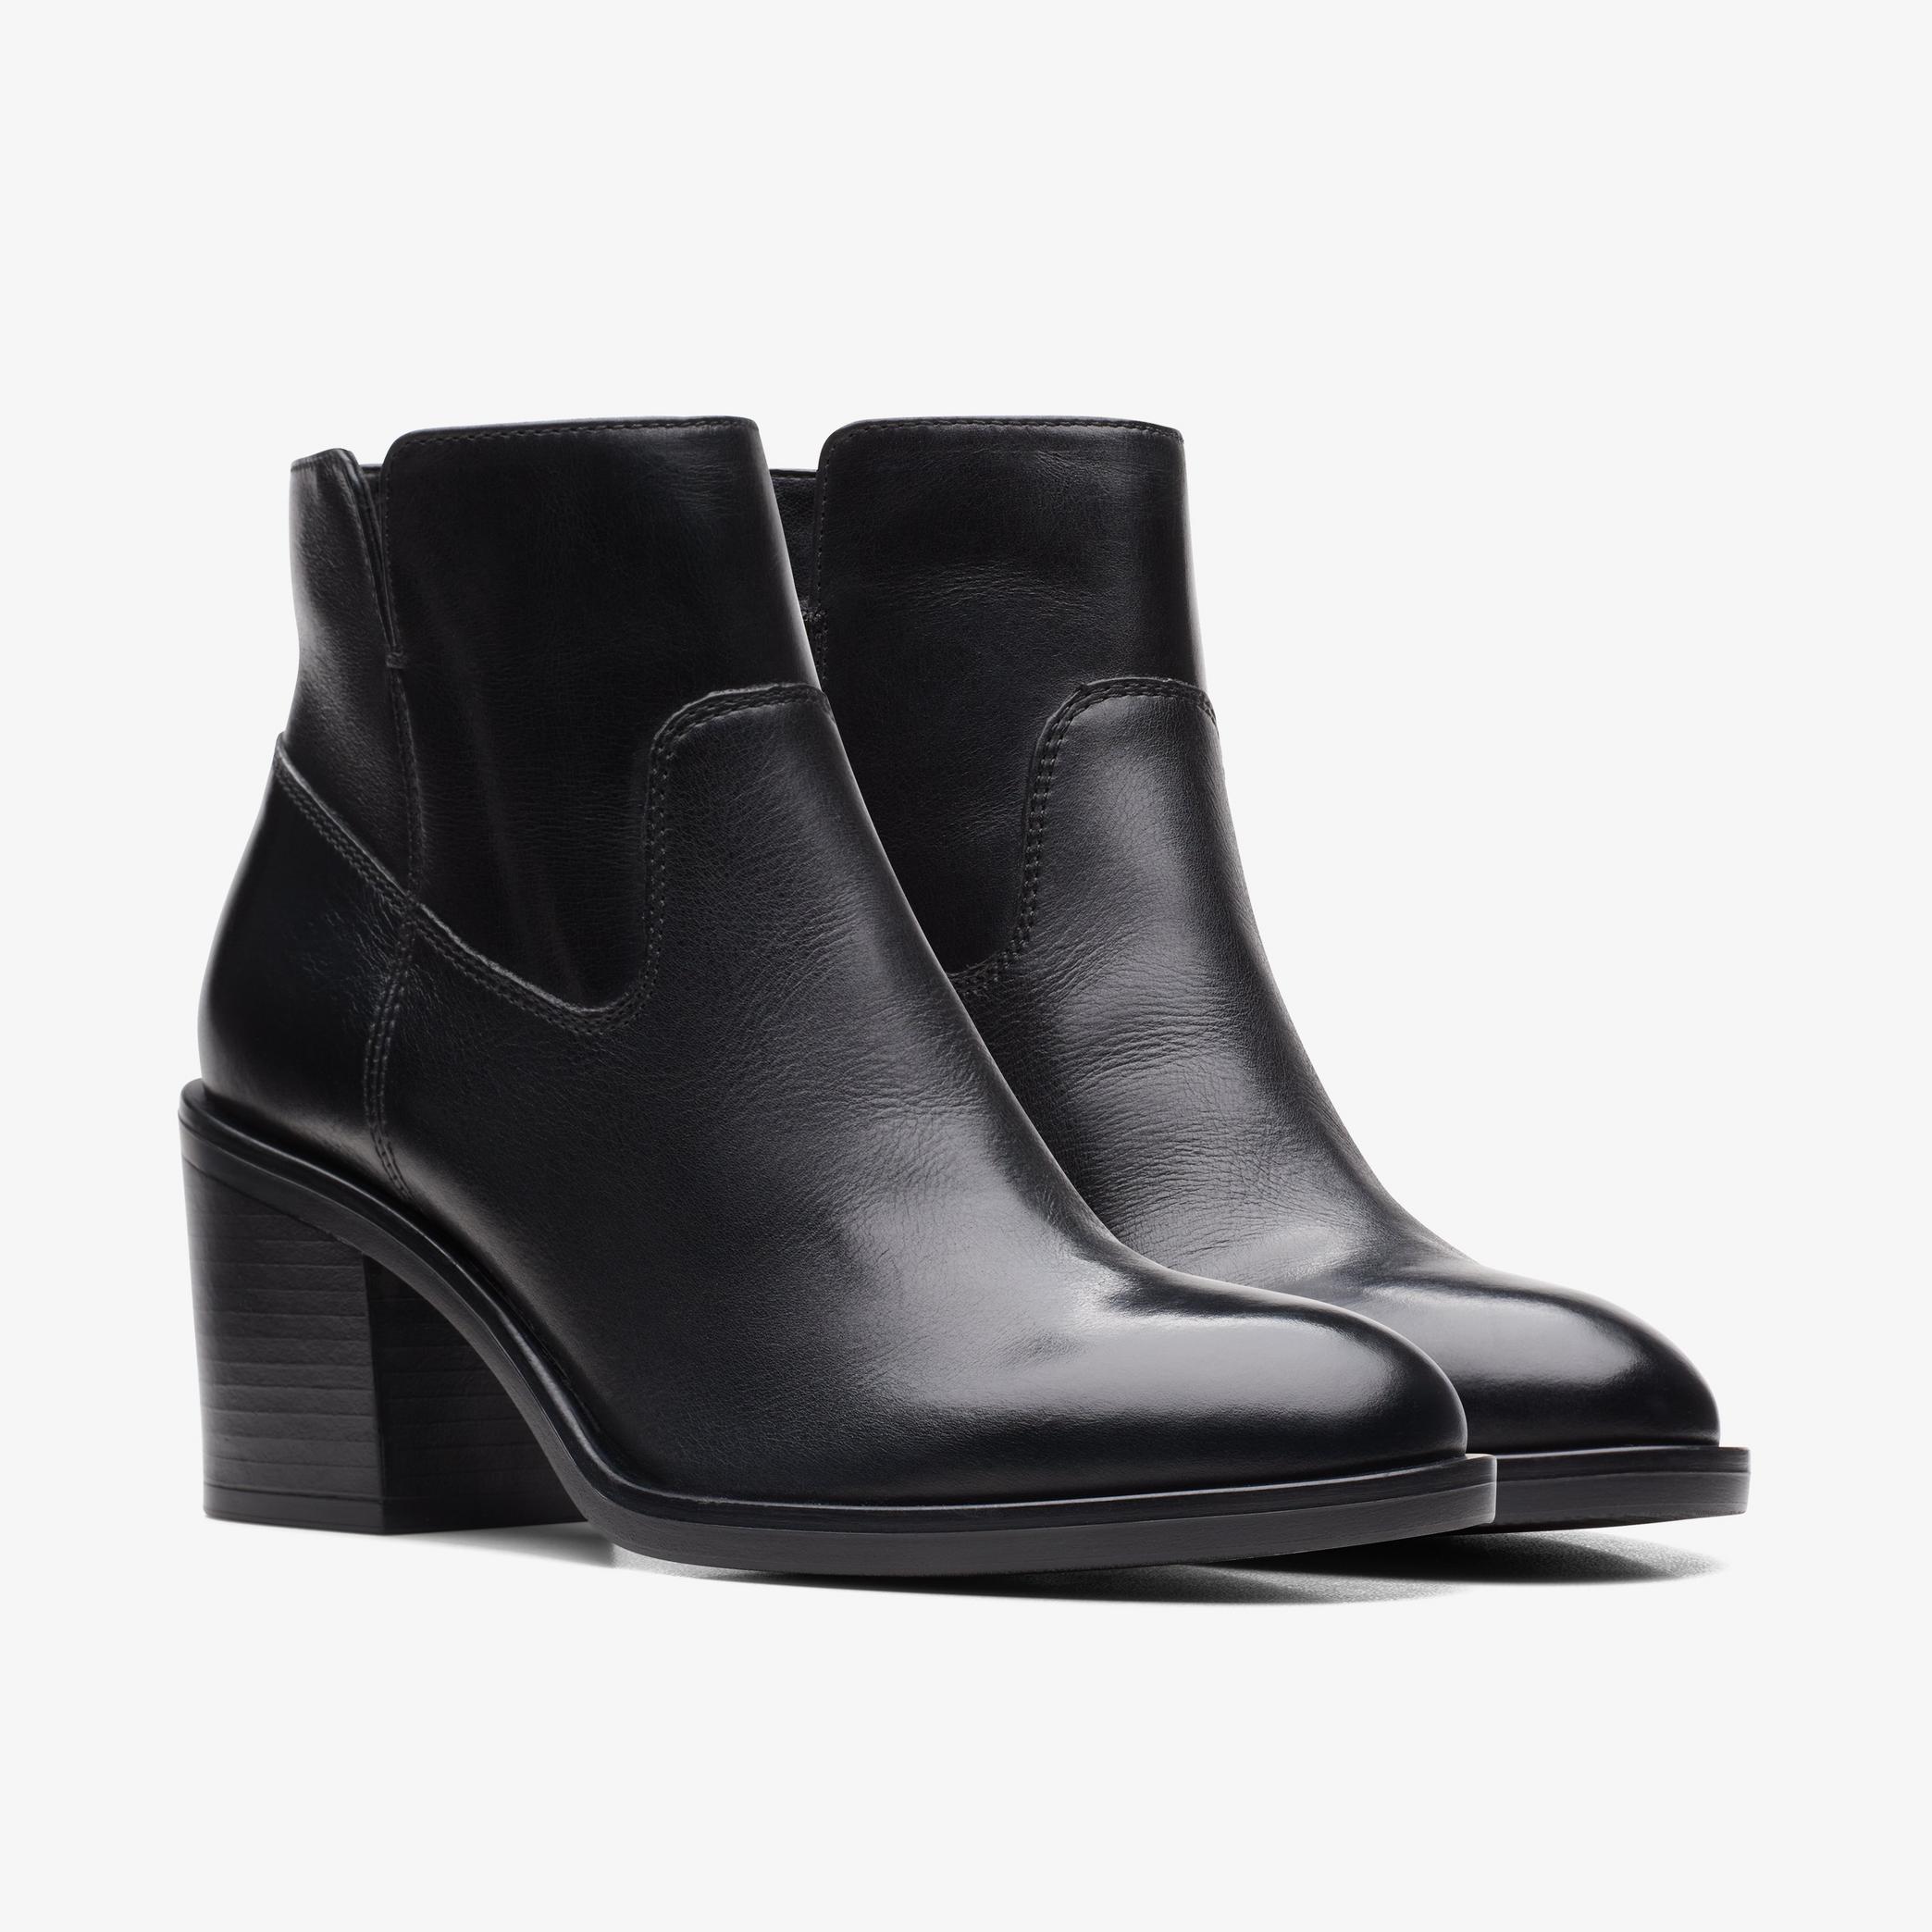 Valvestino Lo Black Leather Ankle Boots, view 5 of 7